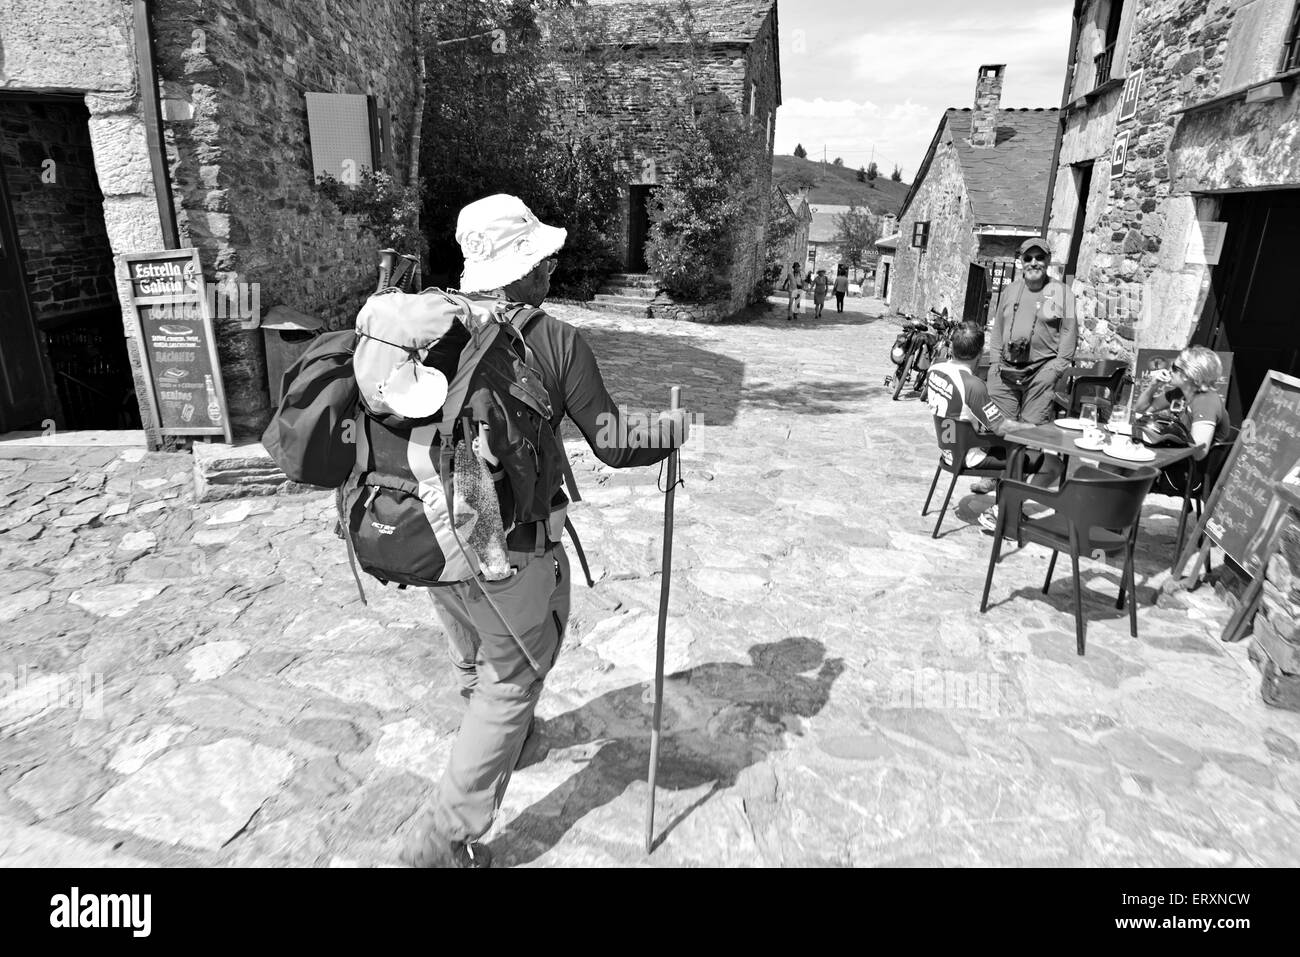 Spain, Galicia: St. James pilgrim arriving in mystic mountain village O Cebreiro meeting his hiking friends in black and white Stock Photo